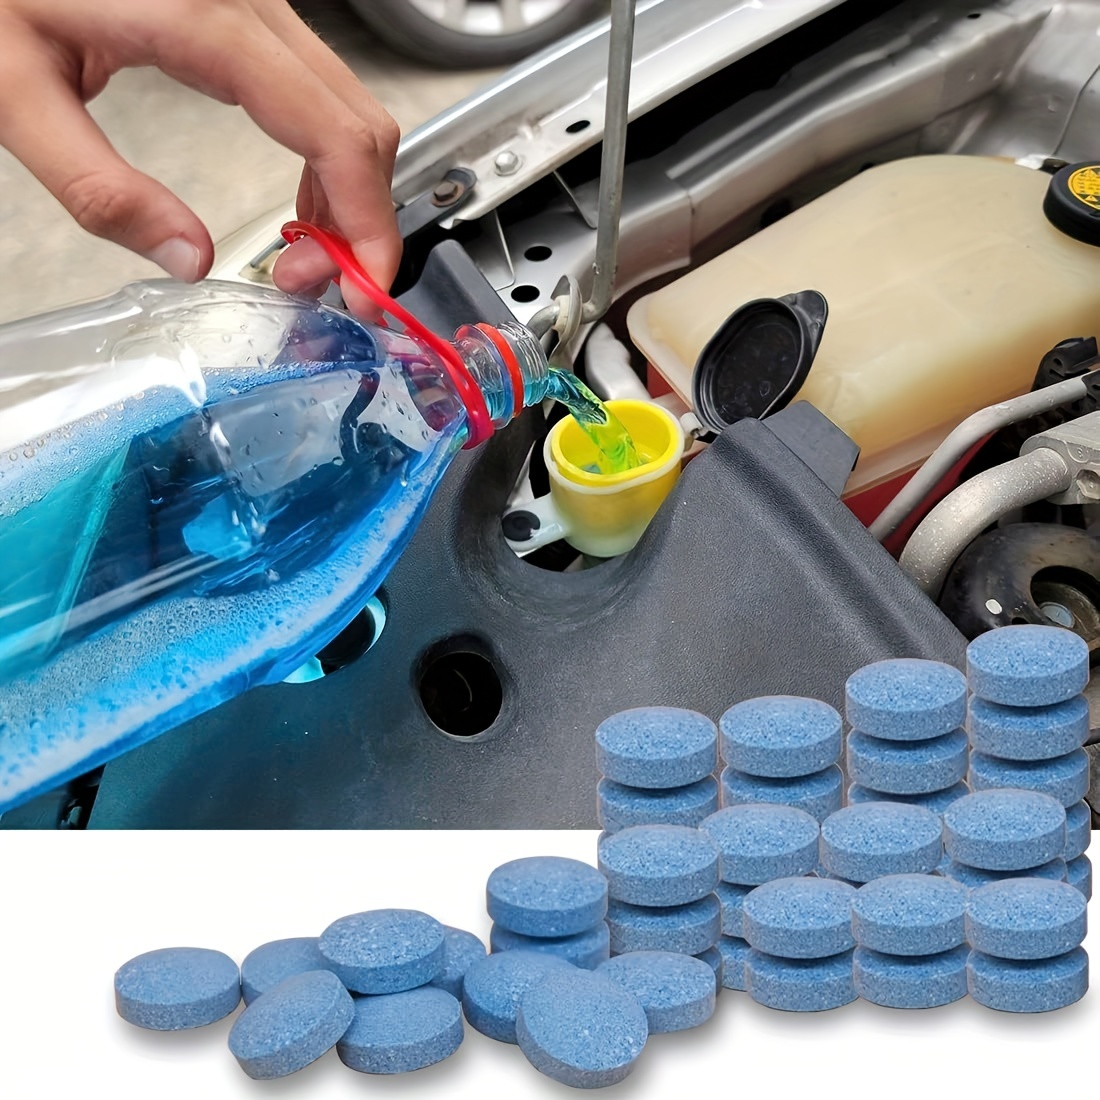 20pcs Windshield Washer Fluid Tablets Concentrated Wiper Fluid, 1 Pack Can  Contain 200 Gallons, Glass Cleaner To Remove Stains And Improve Visibility